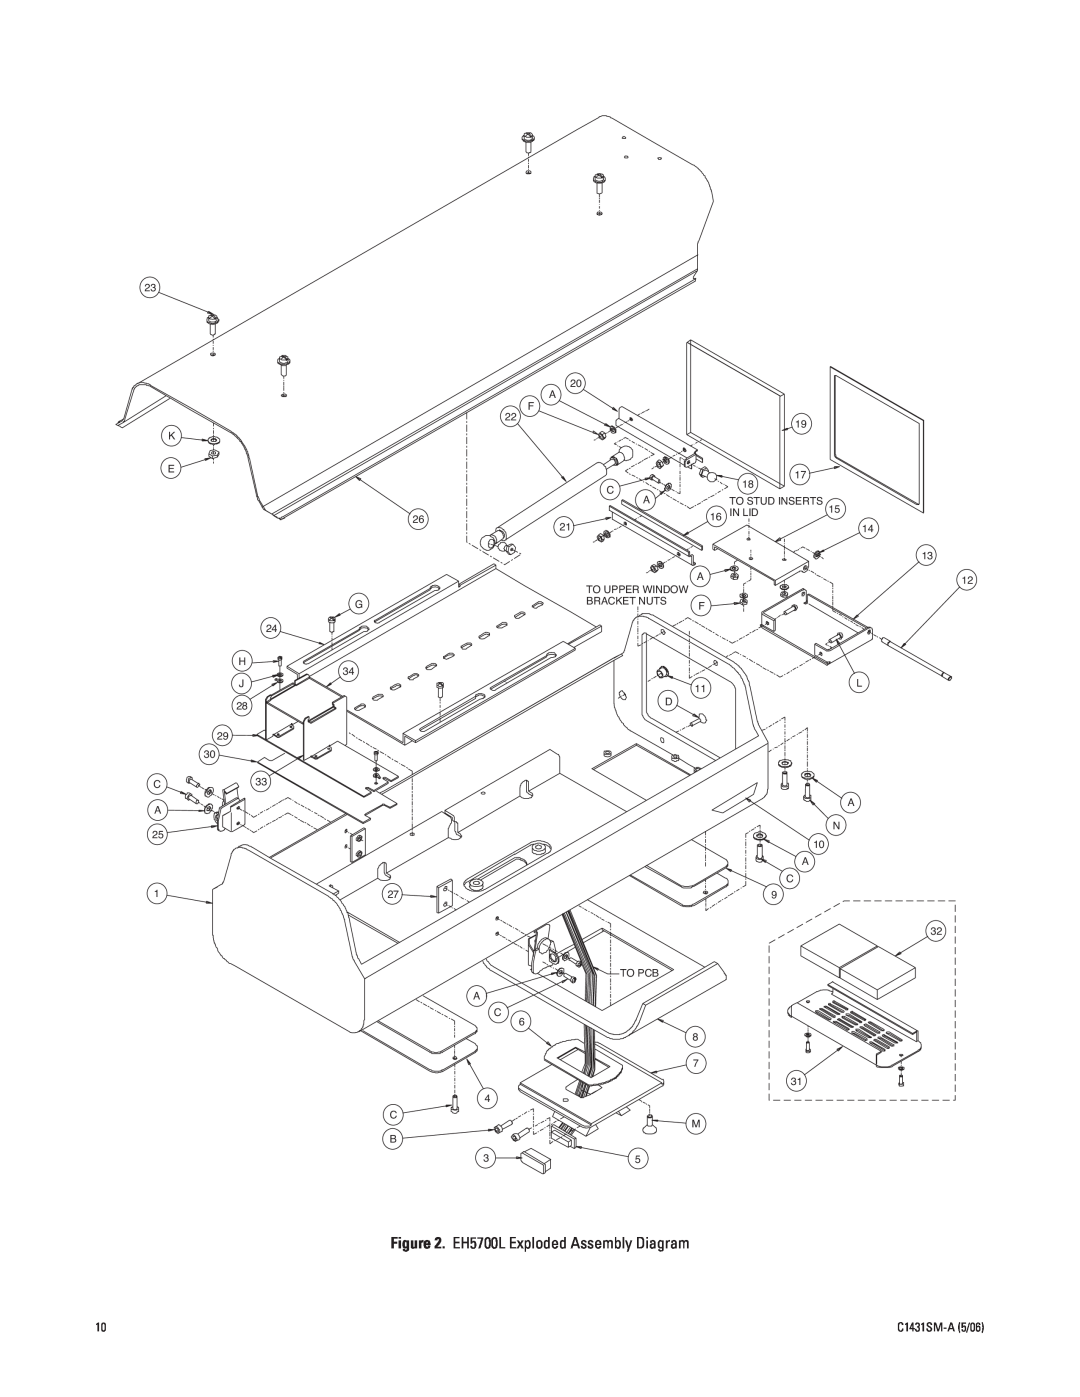 Pelco EH5700 Series manual EH5700L Exploded Assembly Diagram 